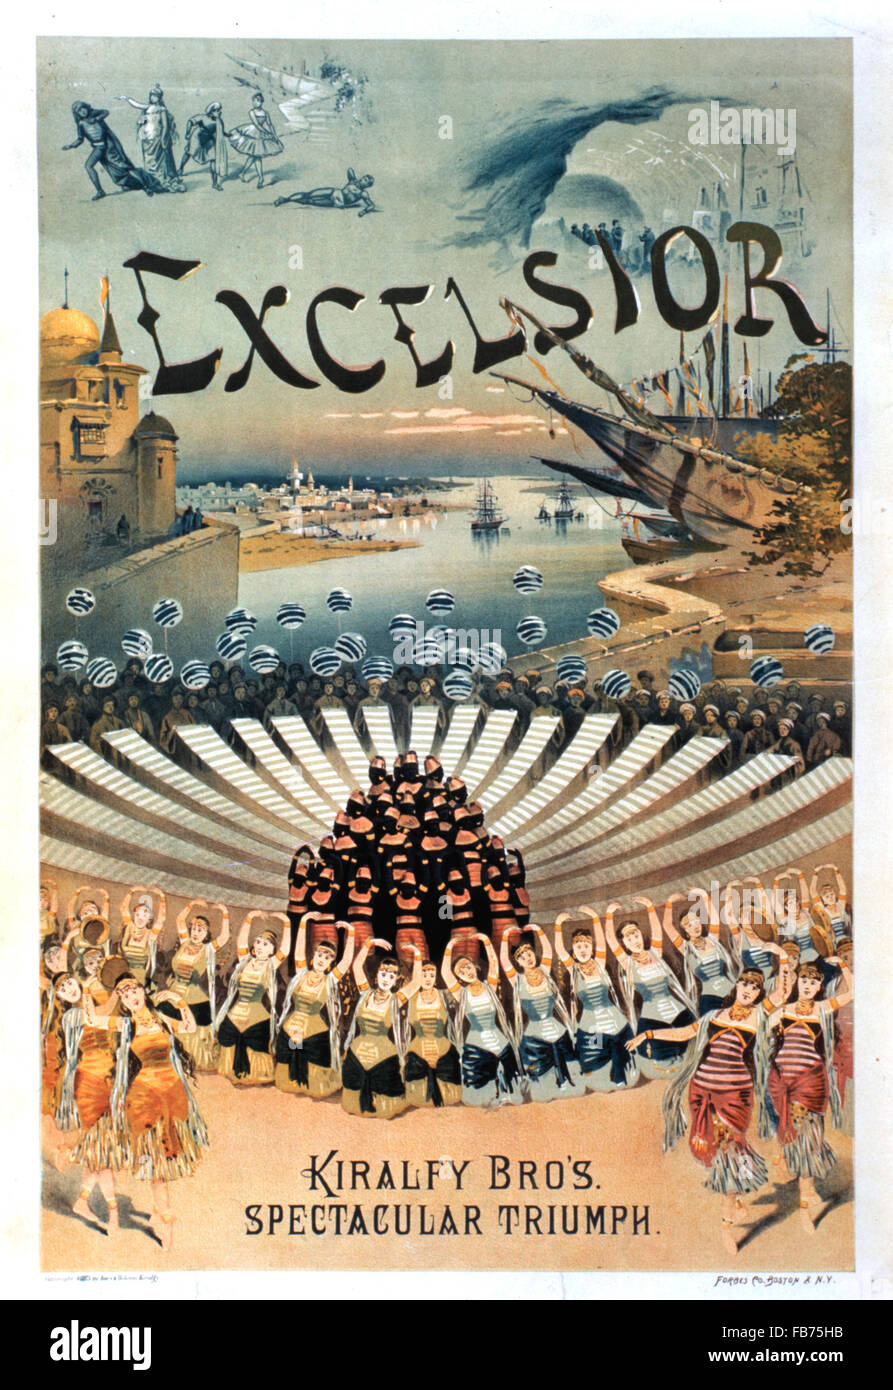 Kiralfy Brothers' Spectacular Triumph, Excelsior, Poster, circa 1883 Stock Photo